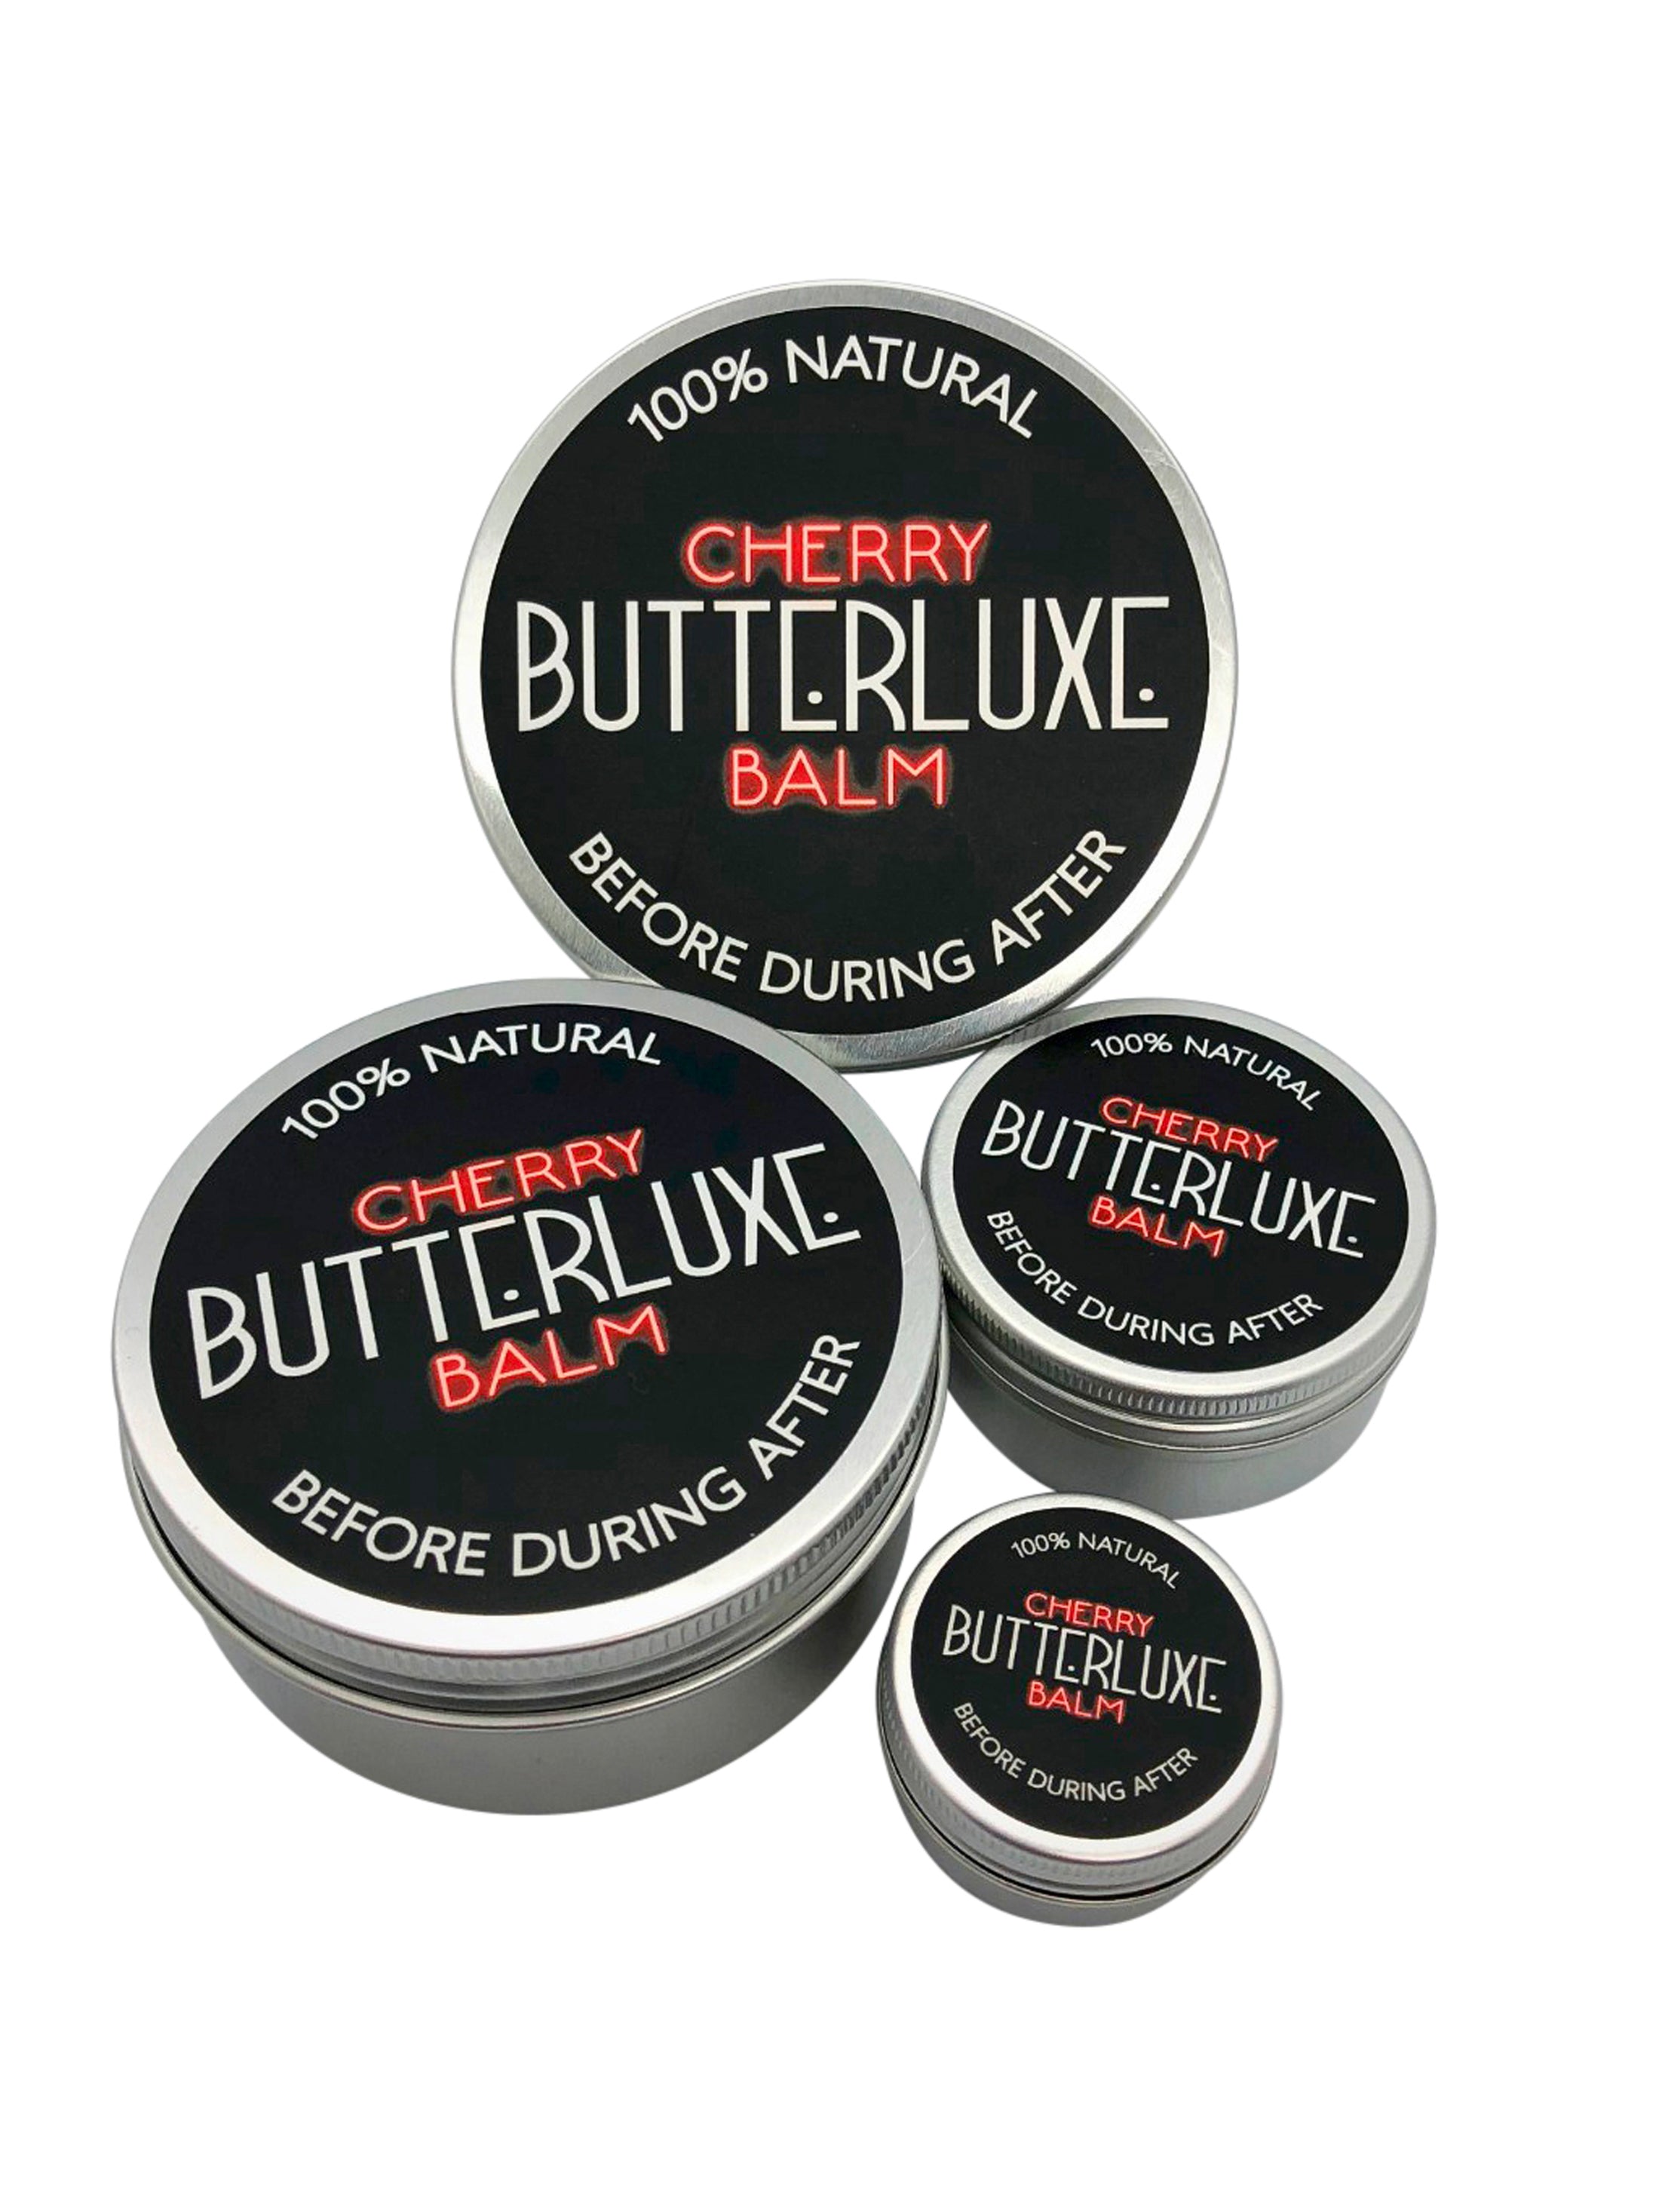 Butterluxe Limited Reviews  Read Customer Service Reviews of